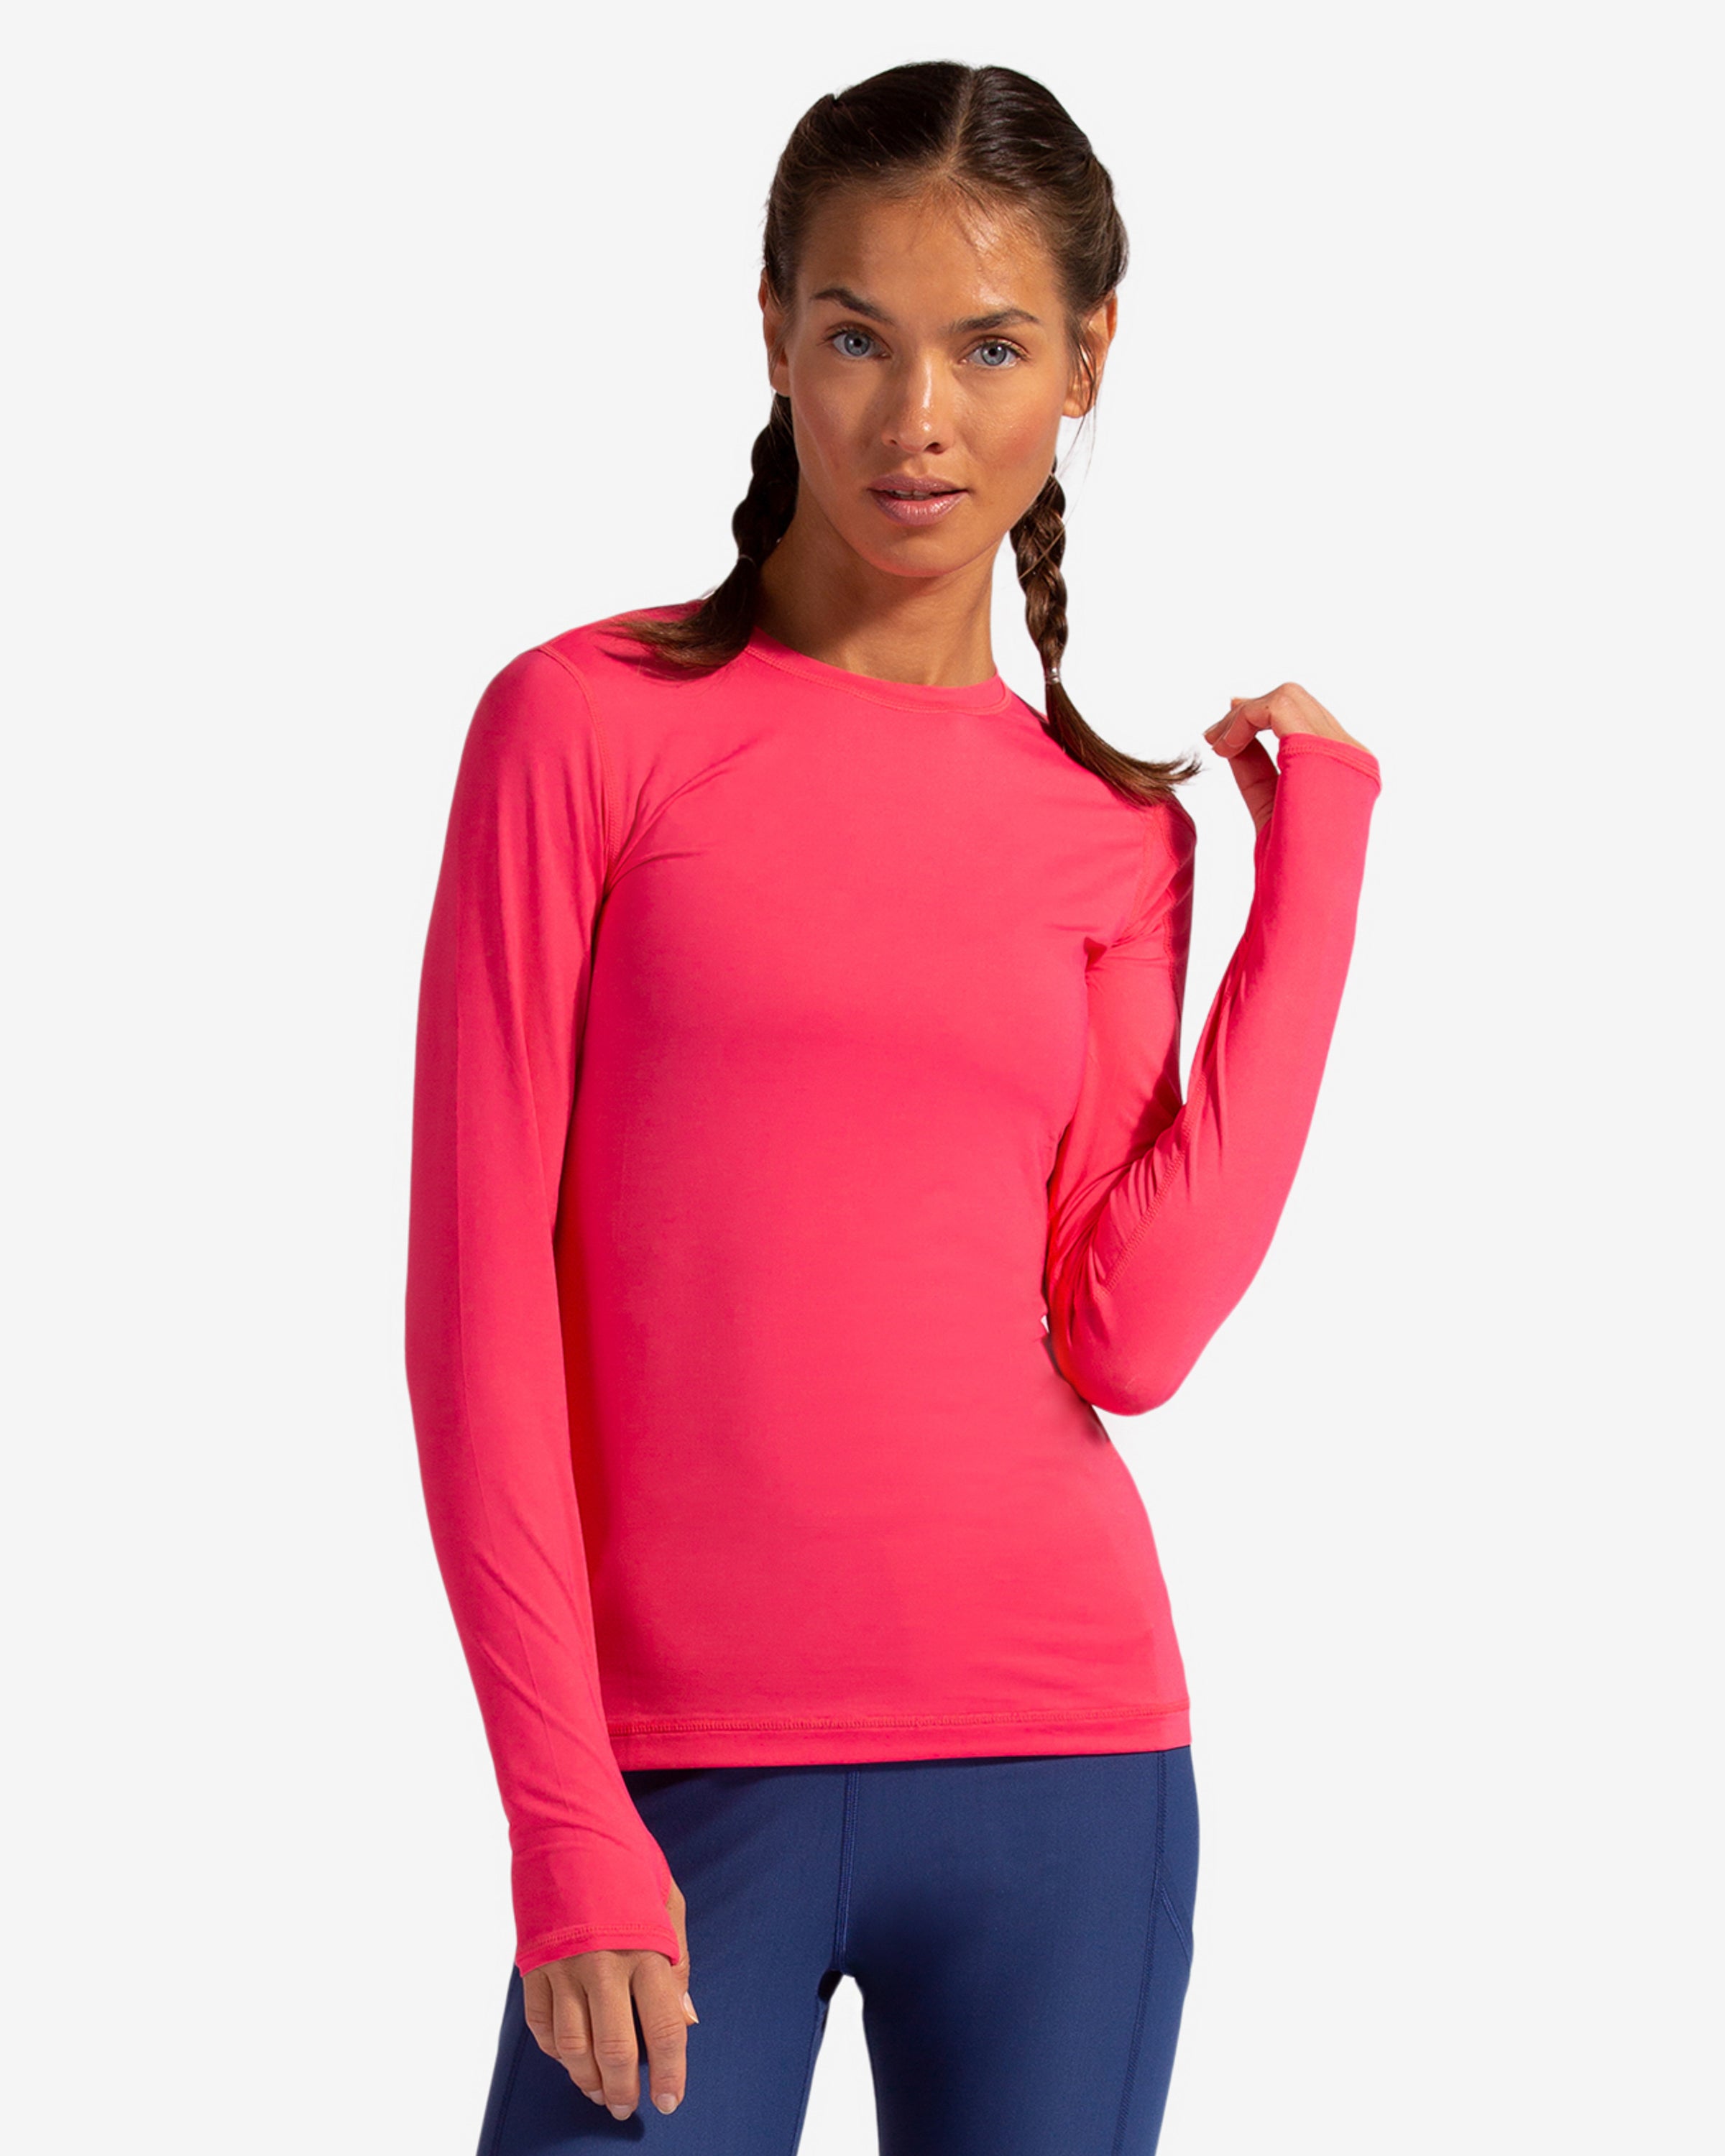 Up To 79% Off on LESIES Women's Long Sleeve V